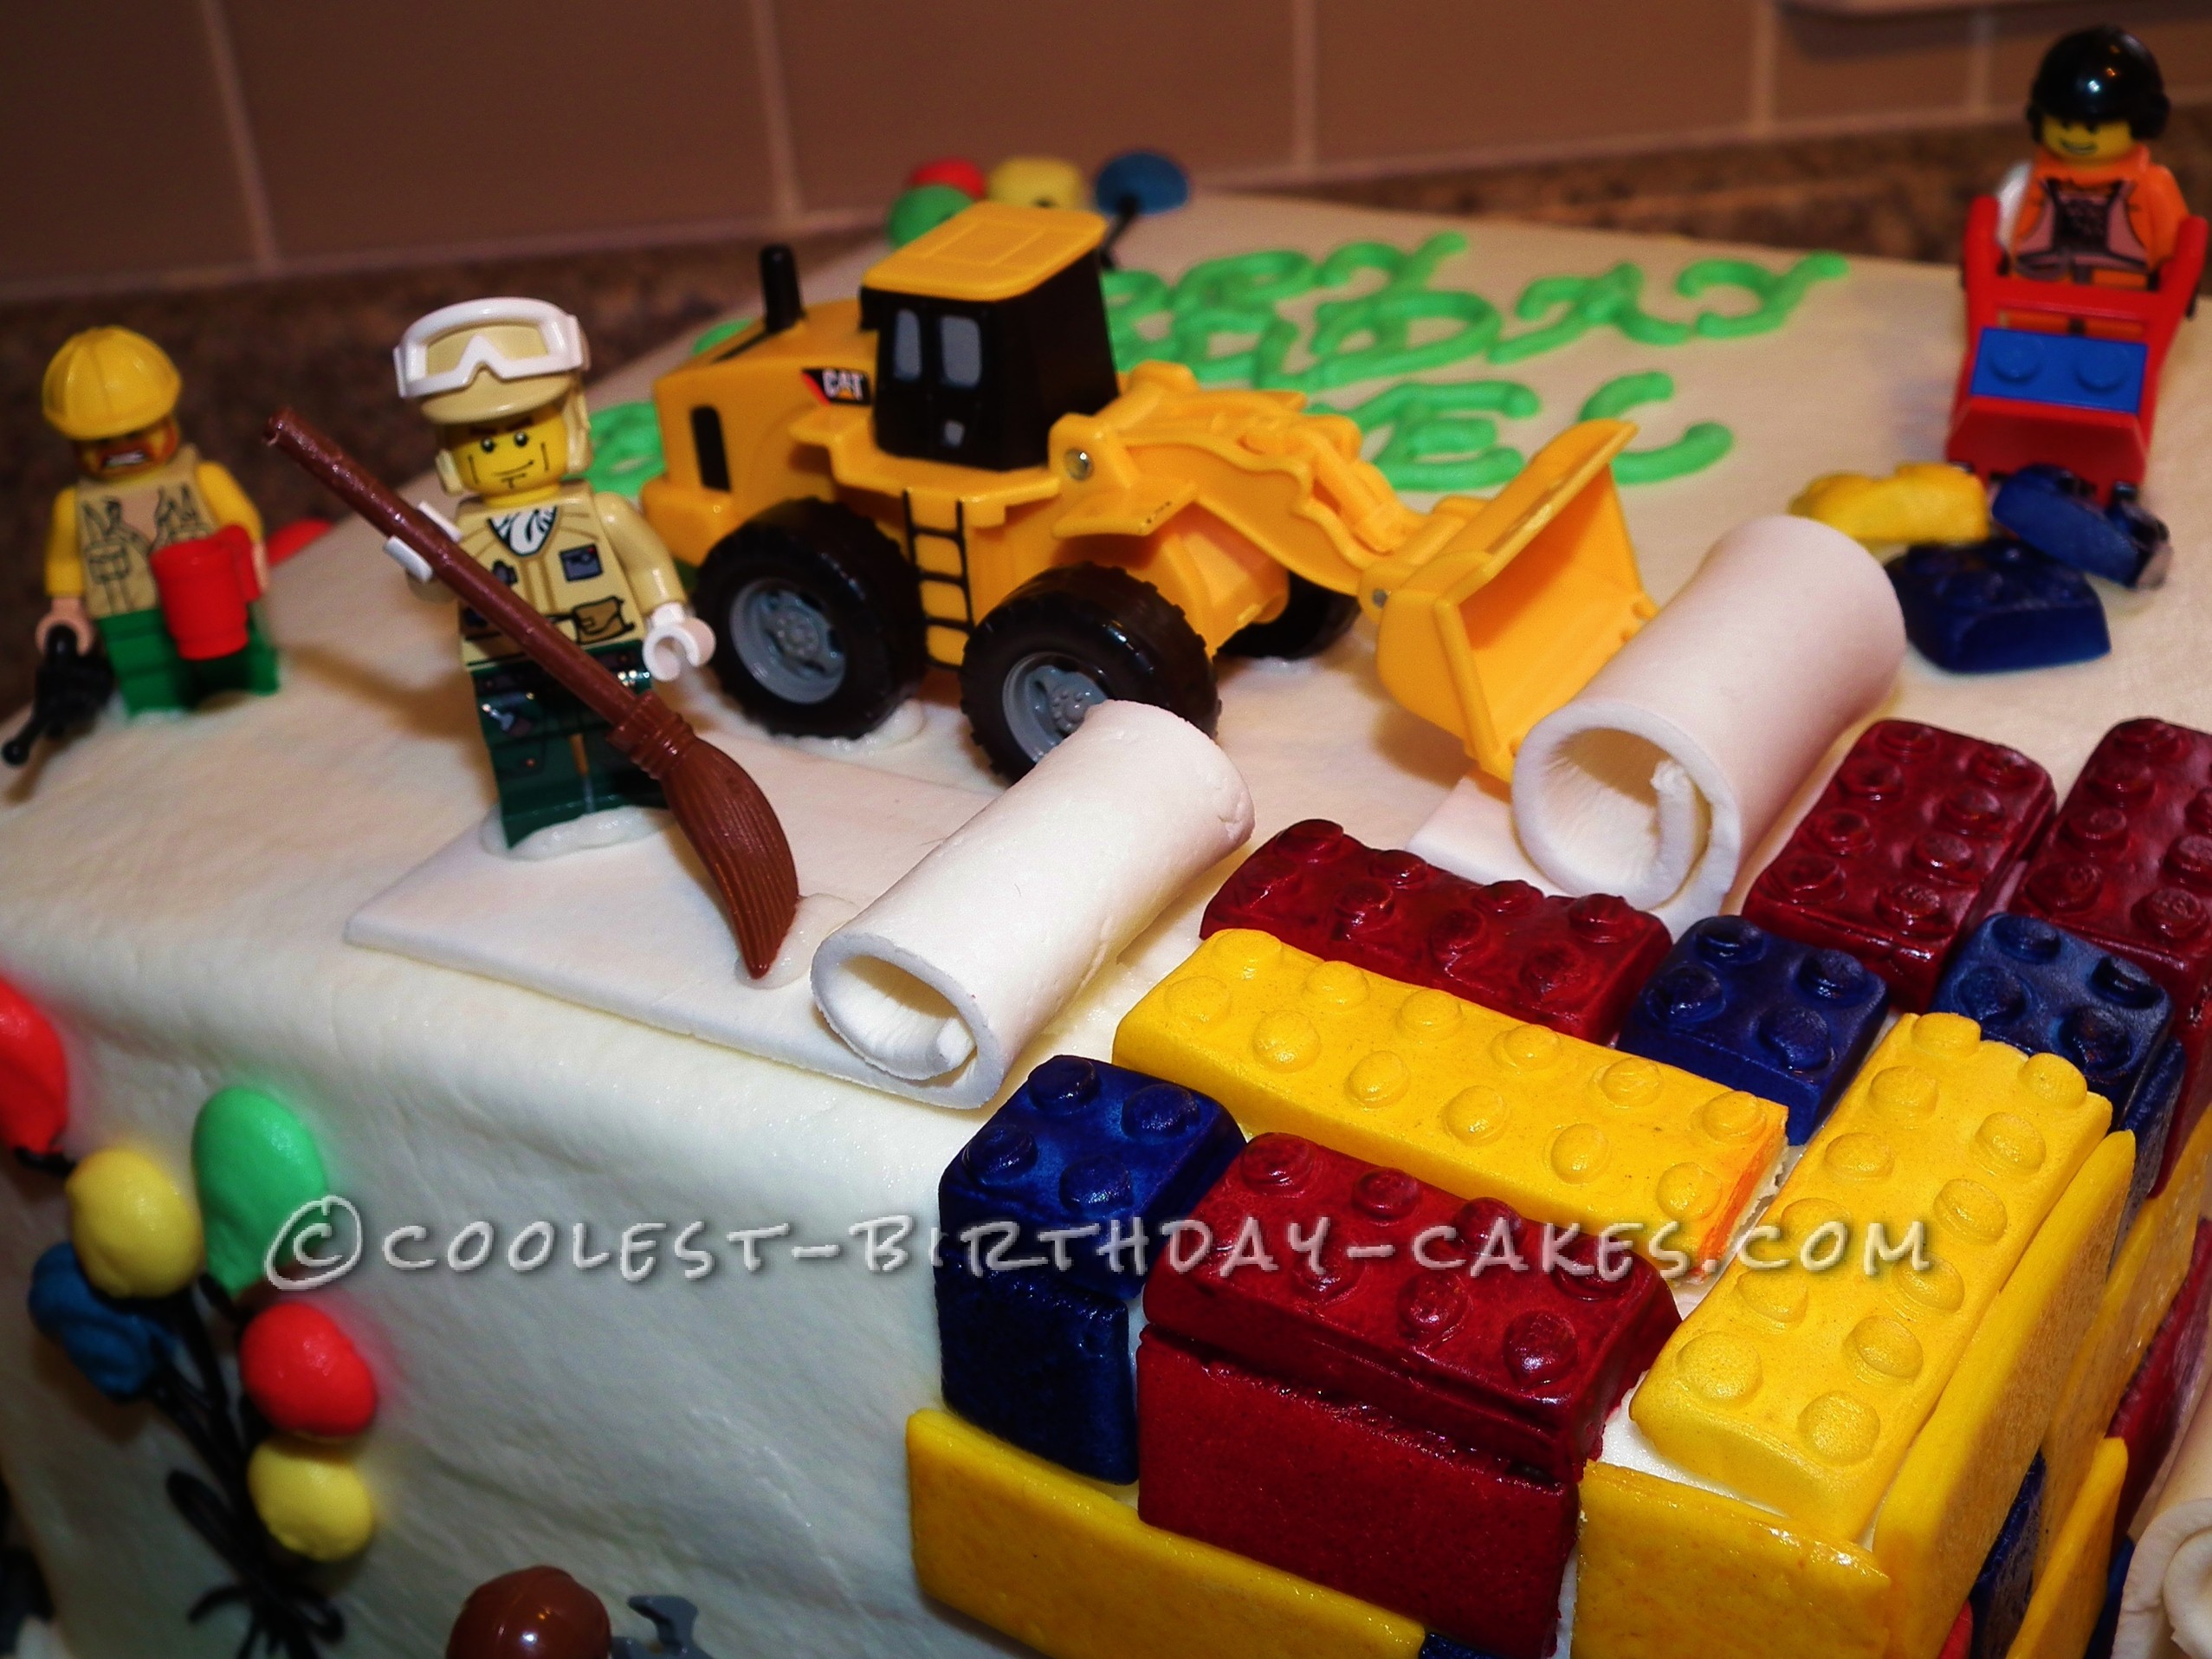 Awesome Lego Cake for Kids